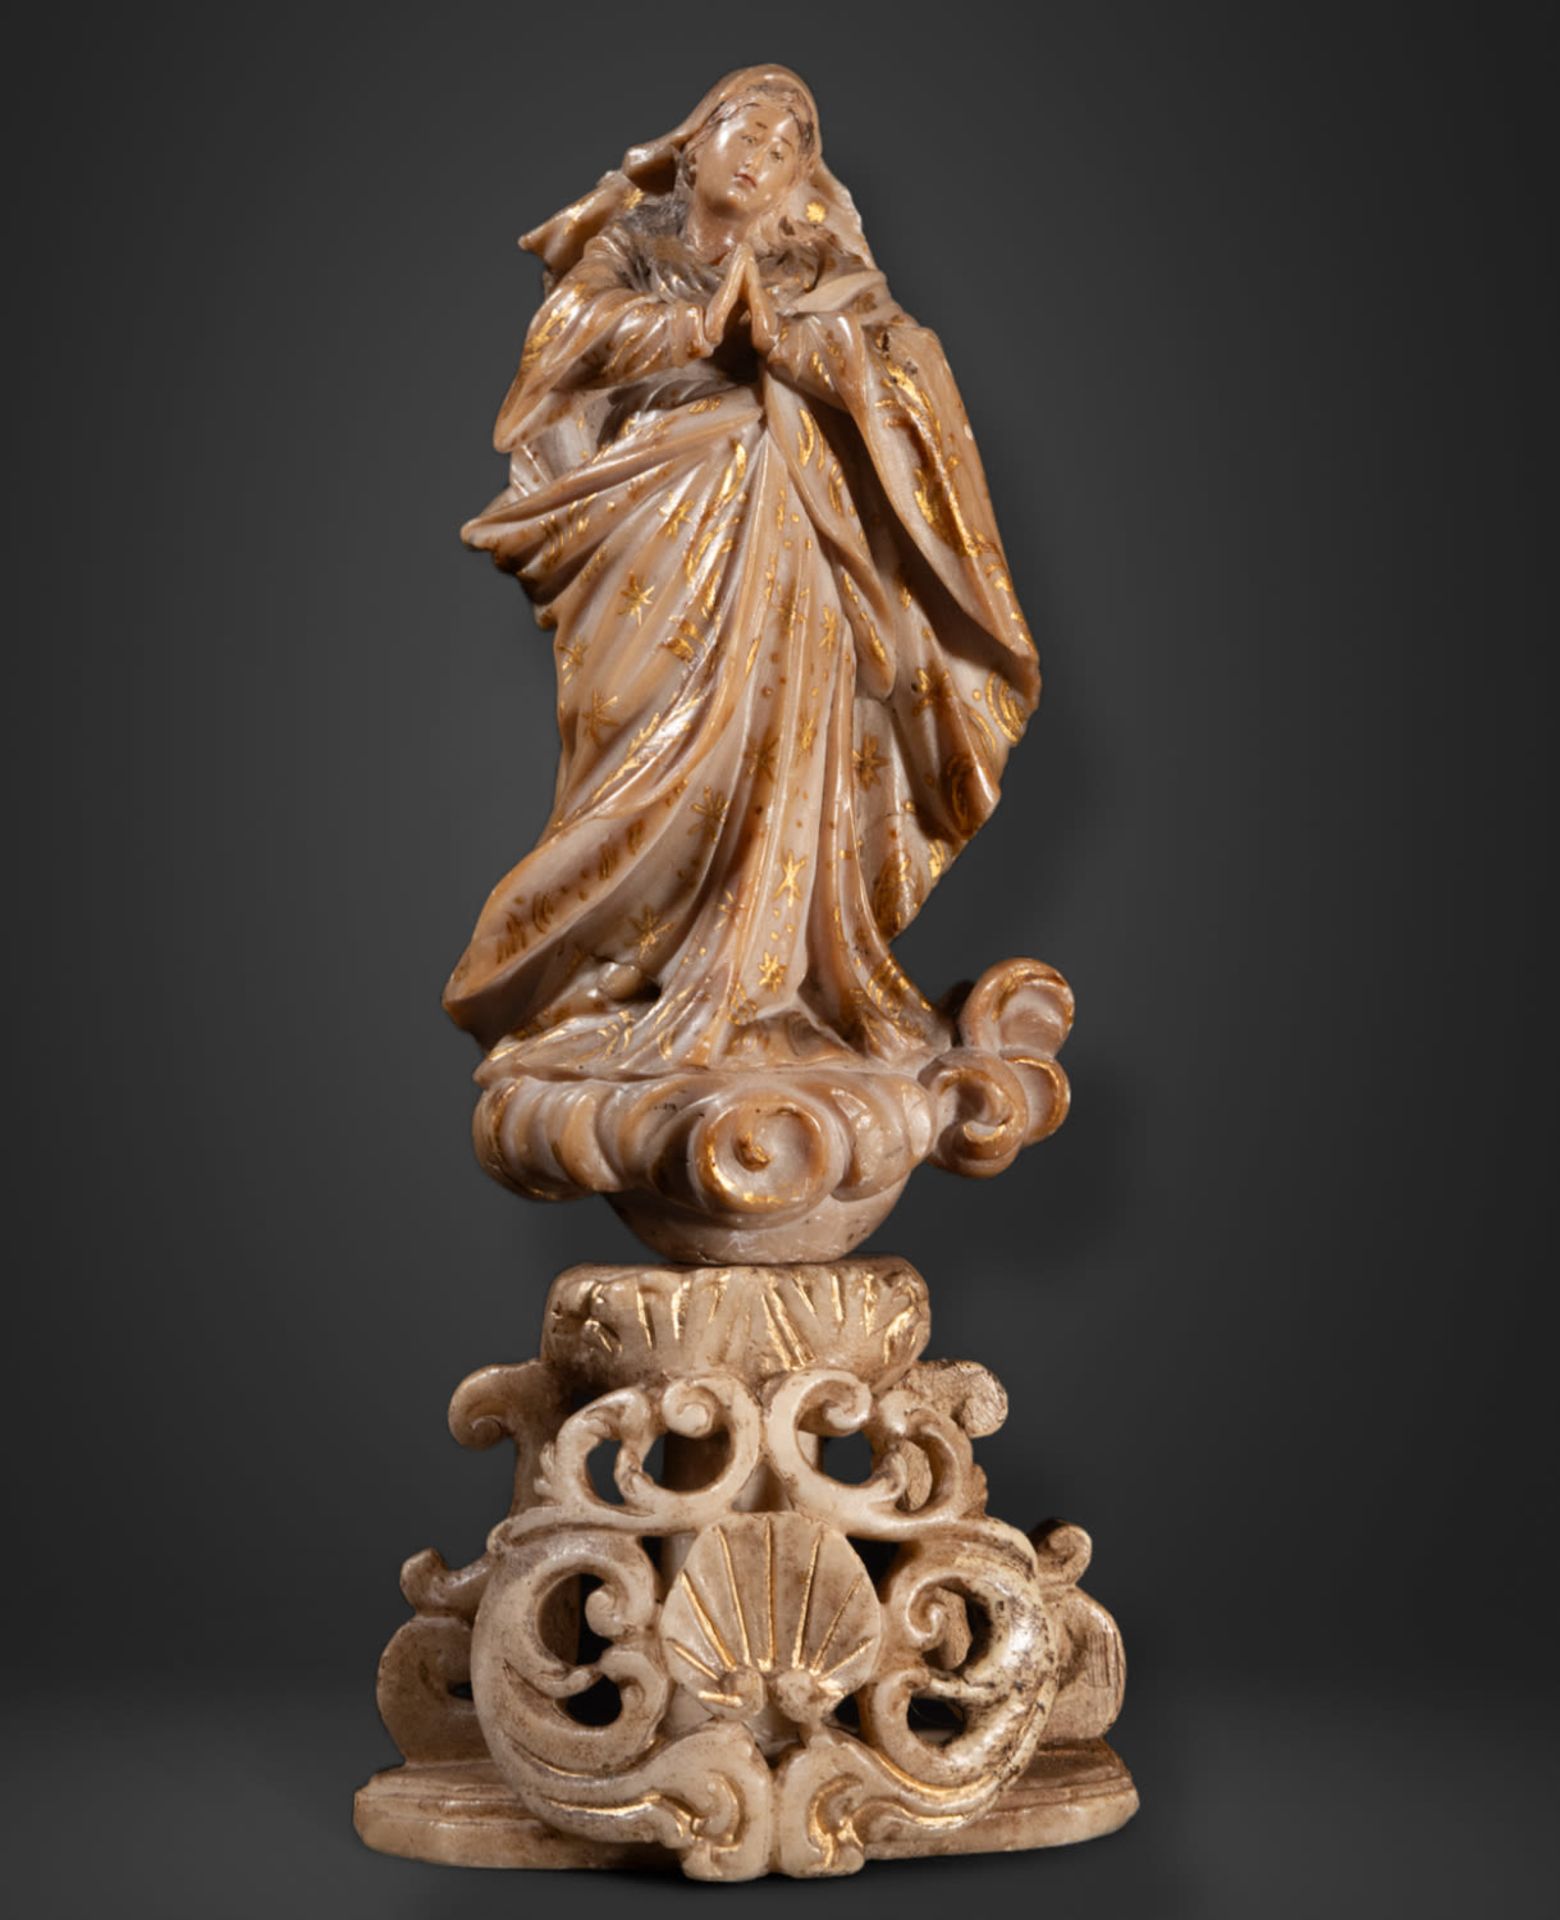 Beautiful Immaculate Virgin in Peruvian colonial Glory, Viceregal work of the 17th century